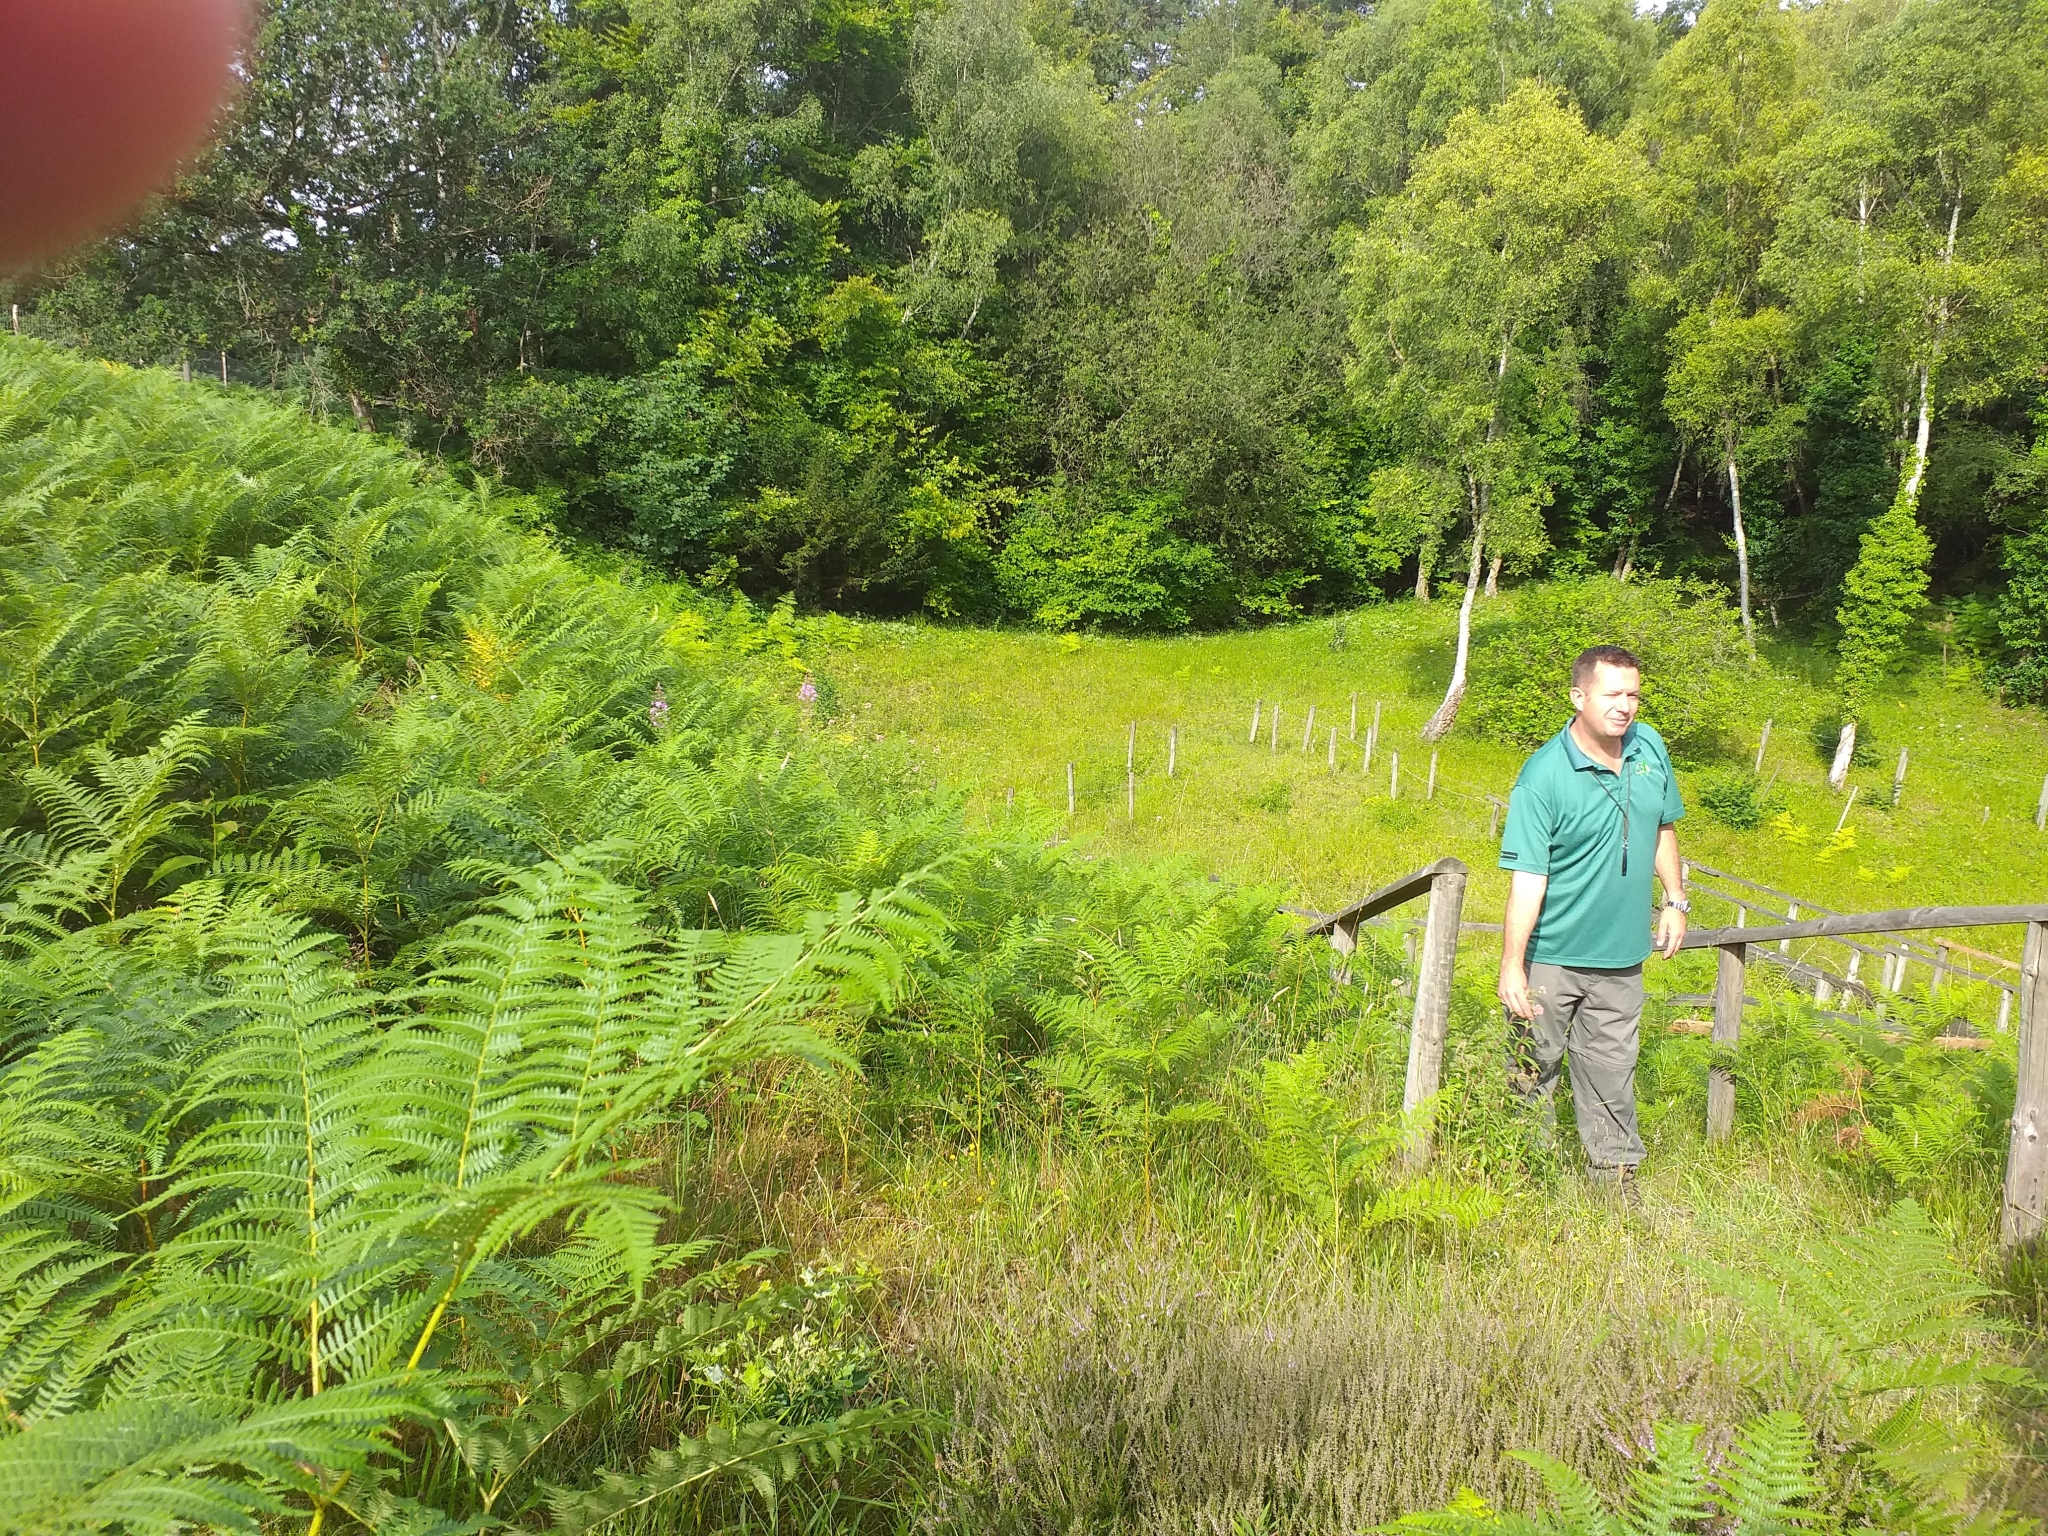 A photo from the FoTF Conservation Event - July 2019 - Weeding at Rex Graham Reserve : The Forestry Commission lead gives a briefing